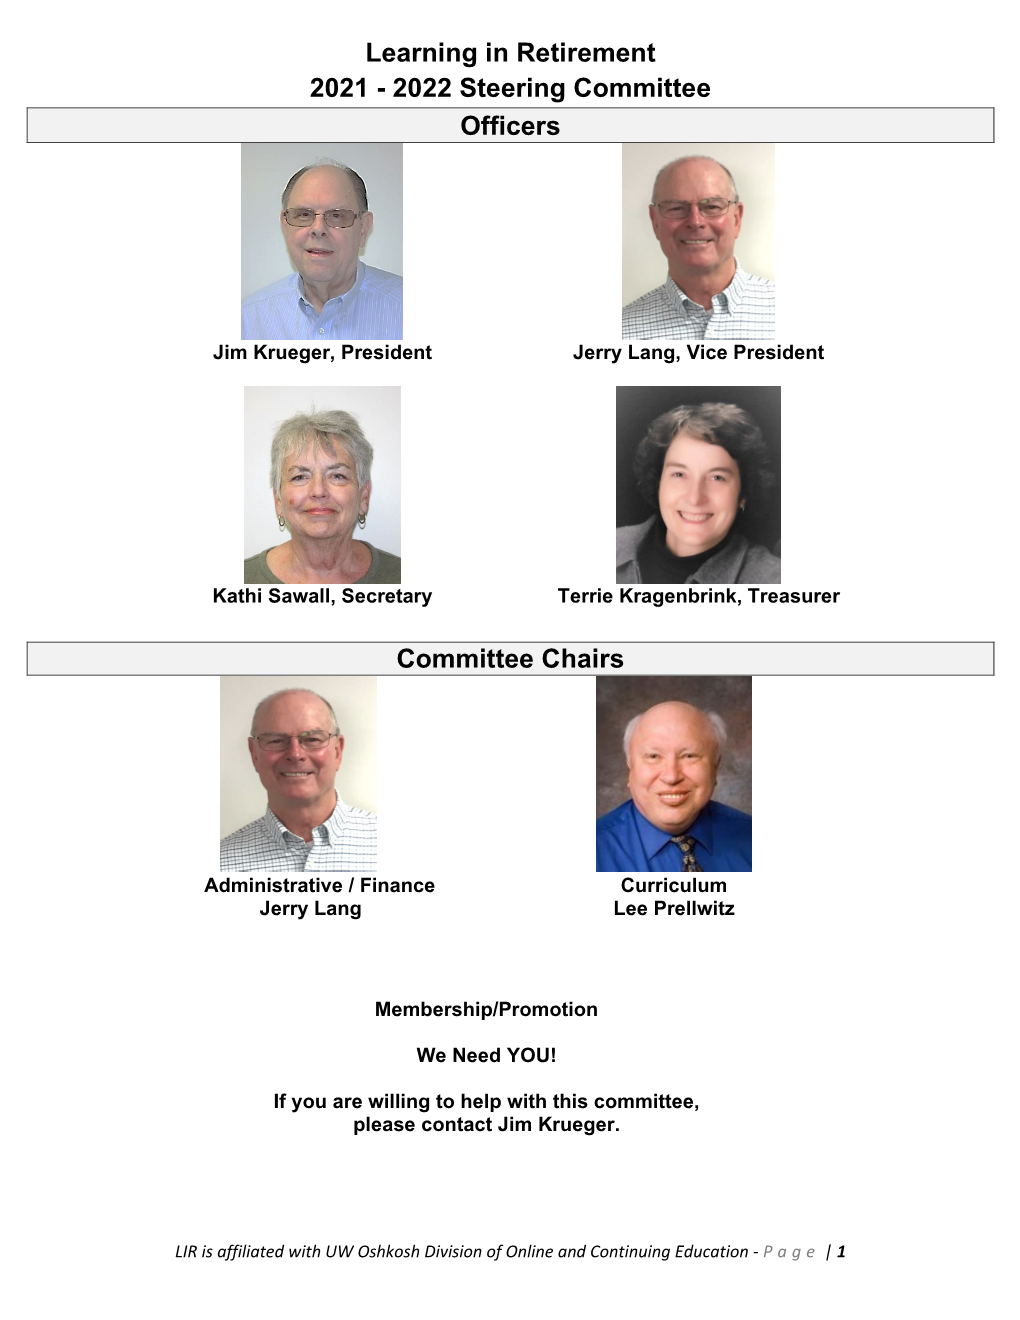 Learning in Retirement 2021 - 2022 Steering Committee Officers